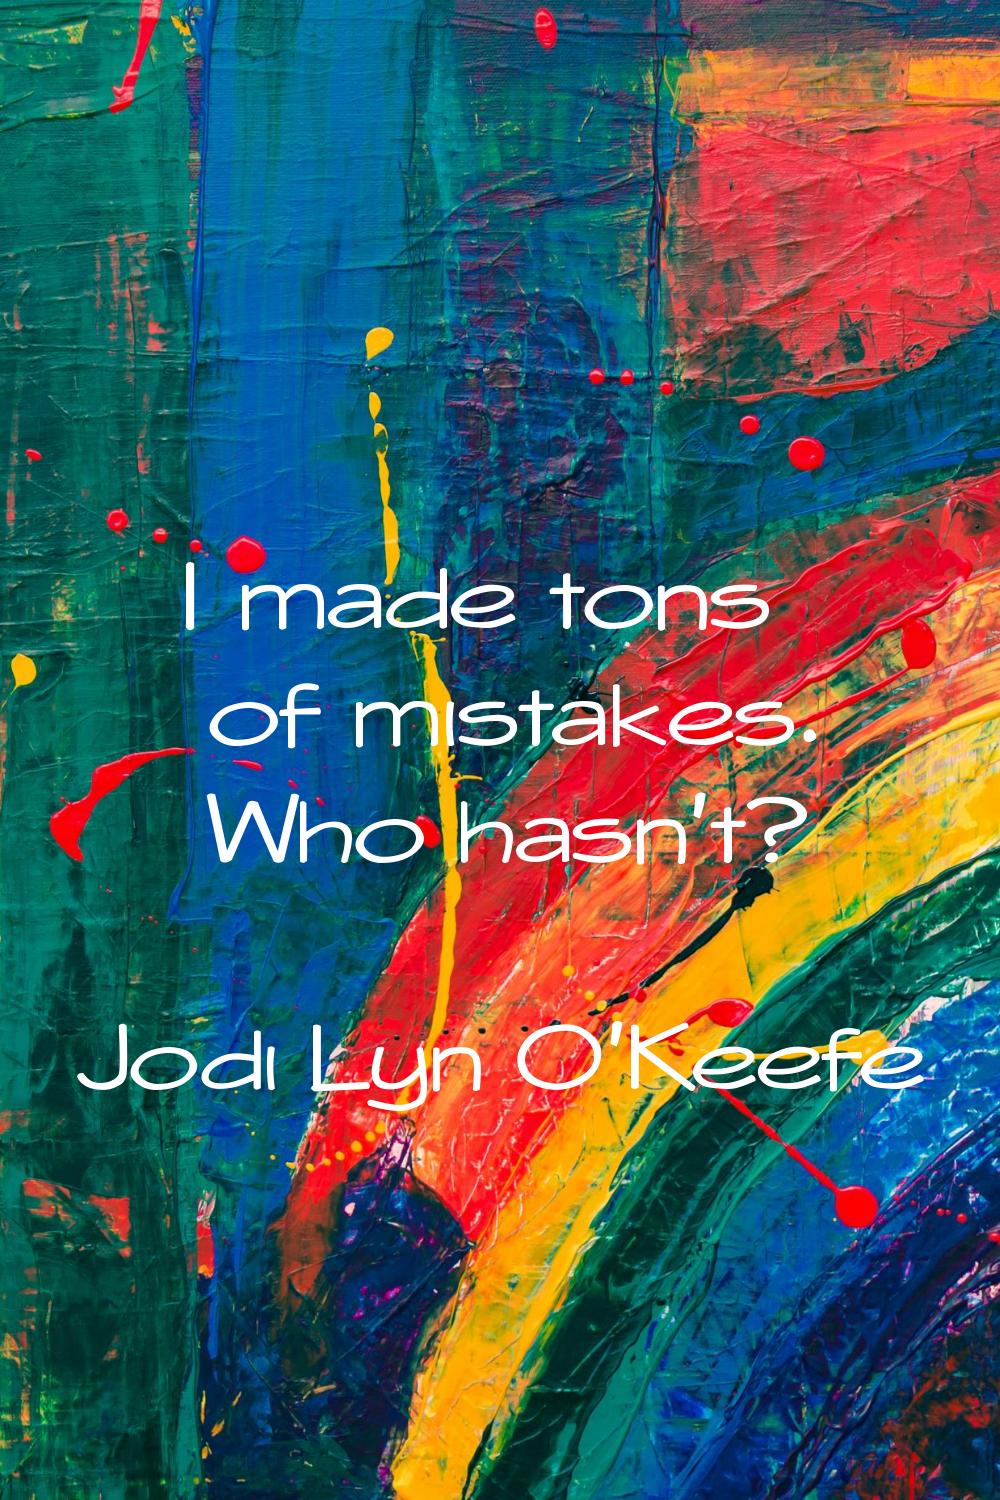 I made tons of mistakes. Who hasn't?